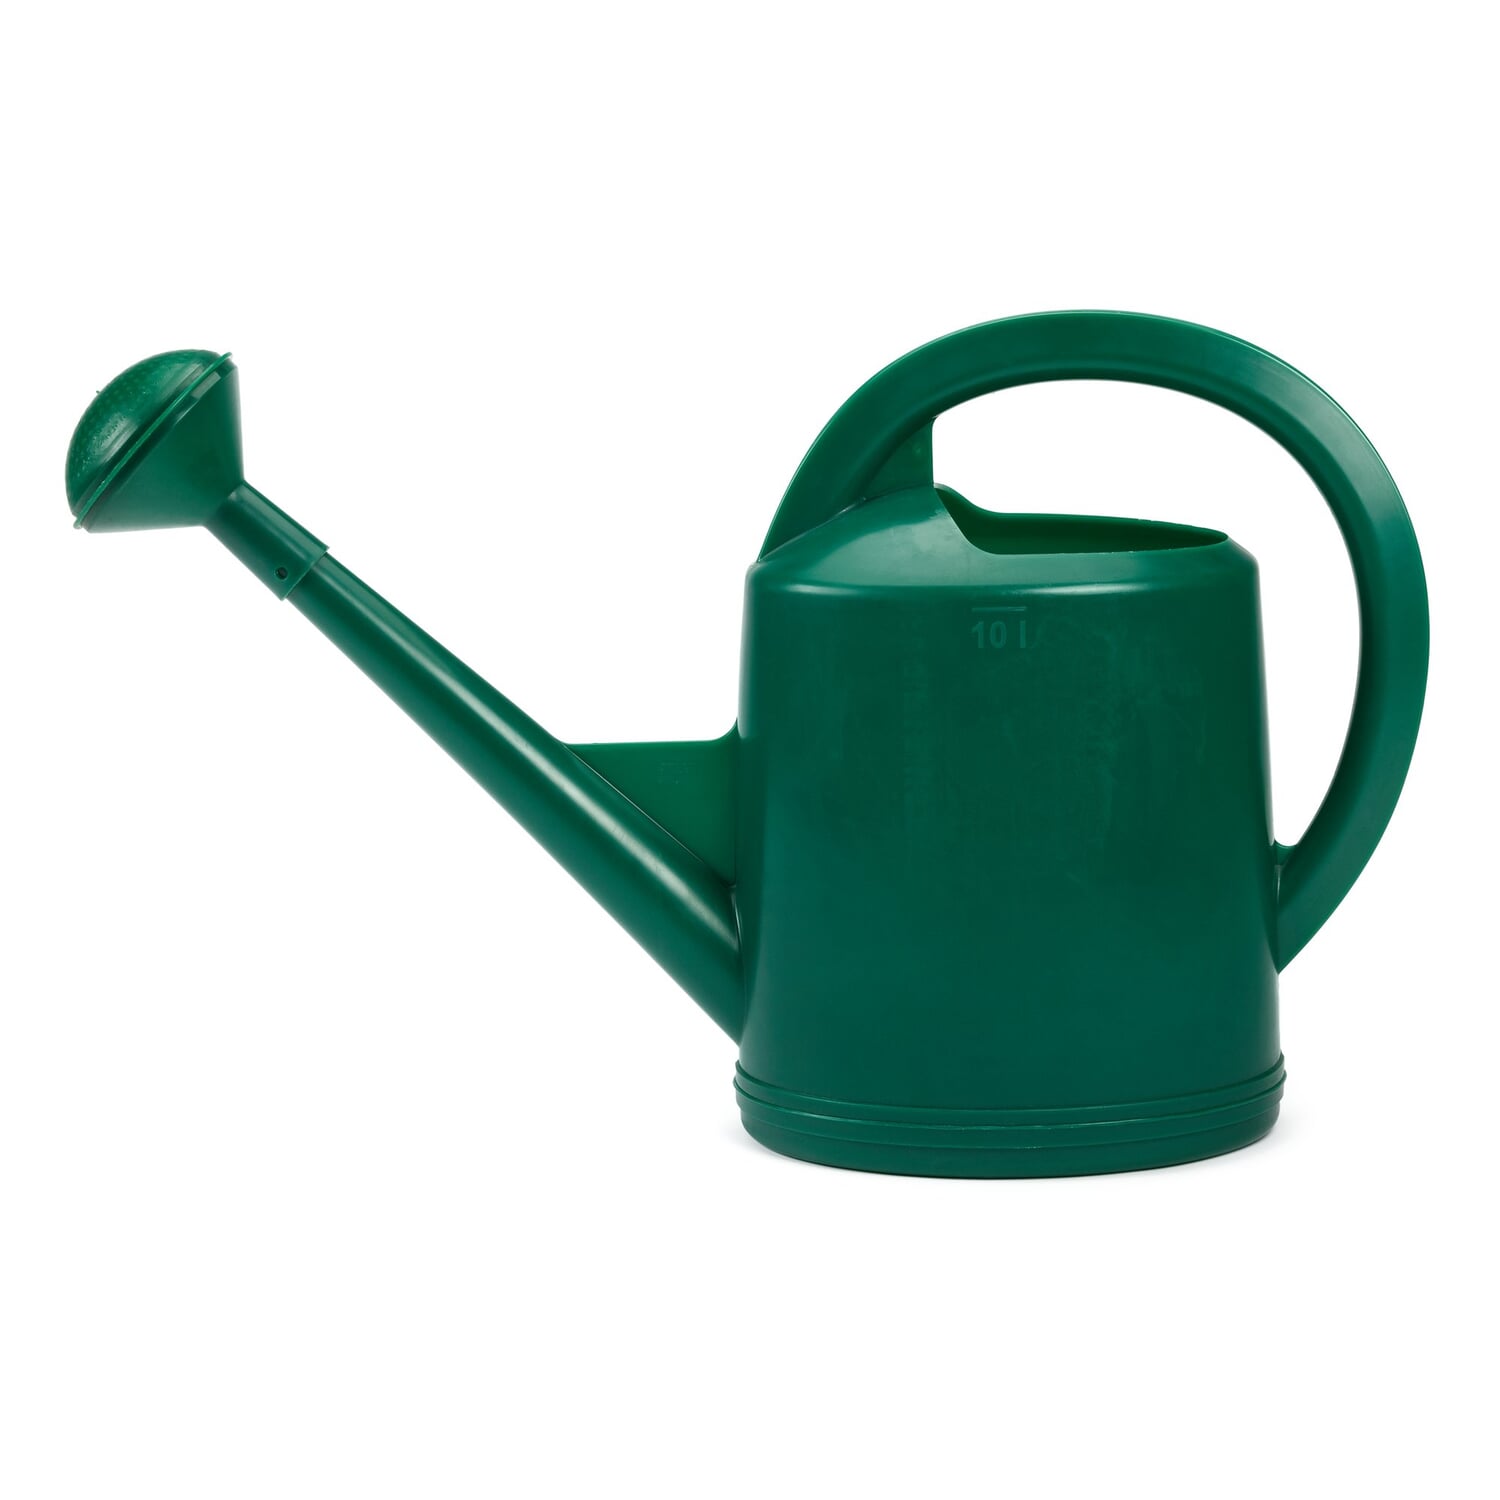 Watering can citibusiness